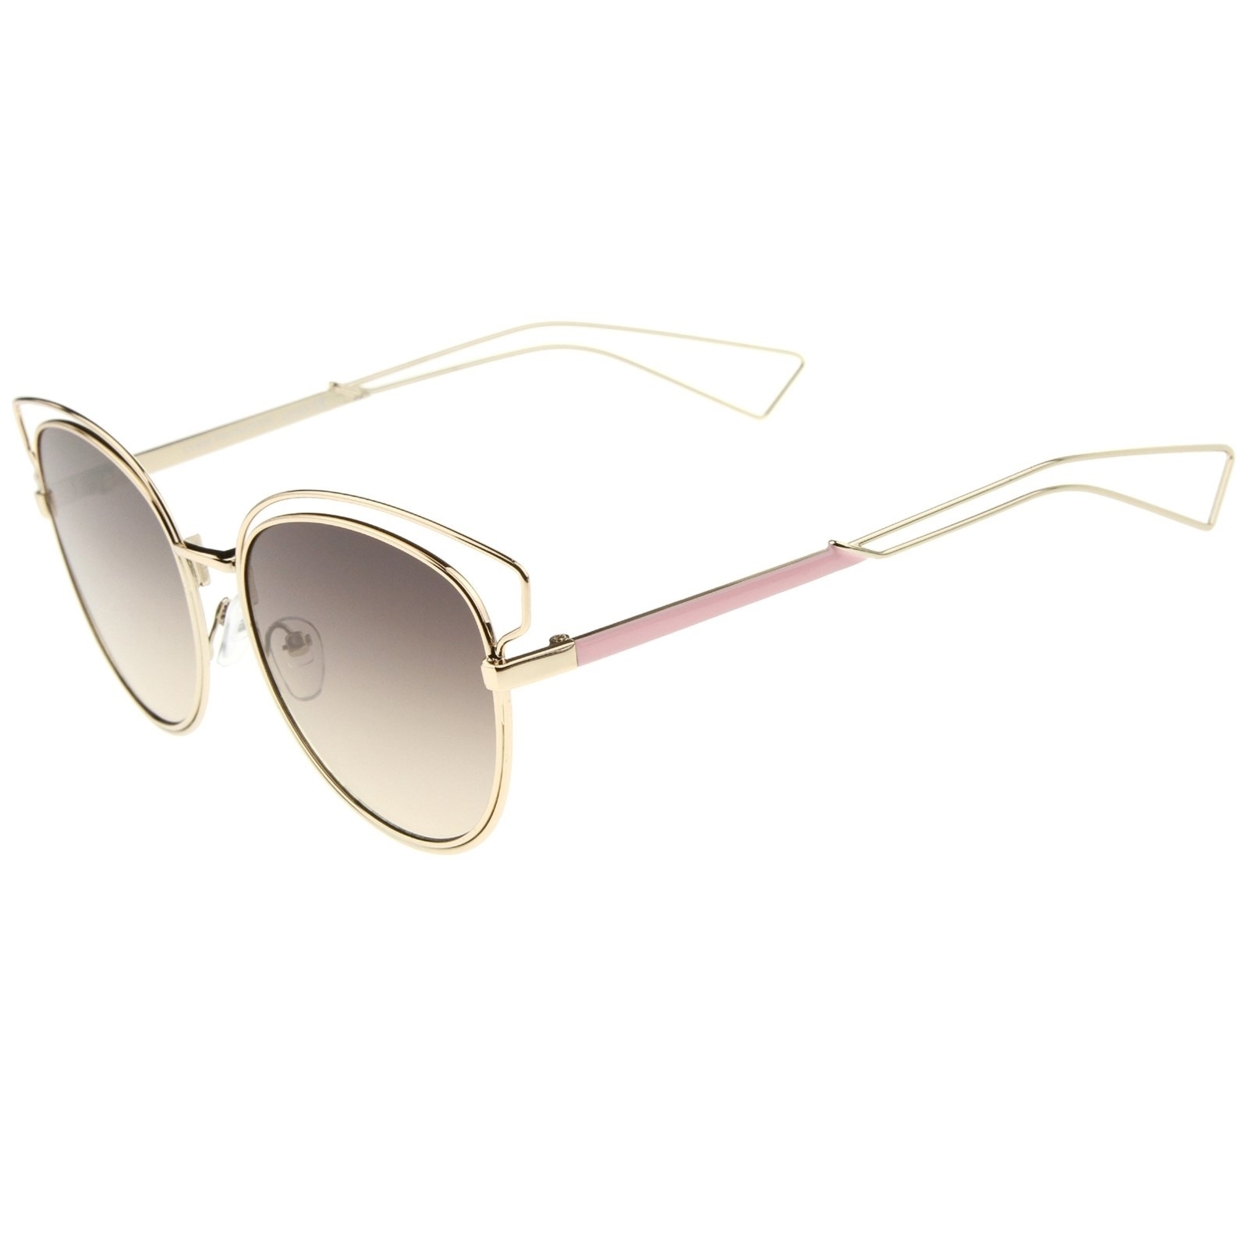 Womens Fashion Open Metal Frame Neutral-Colored Lens Cat Eye Sunglasses 55mm - Gold-White / Lavender